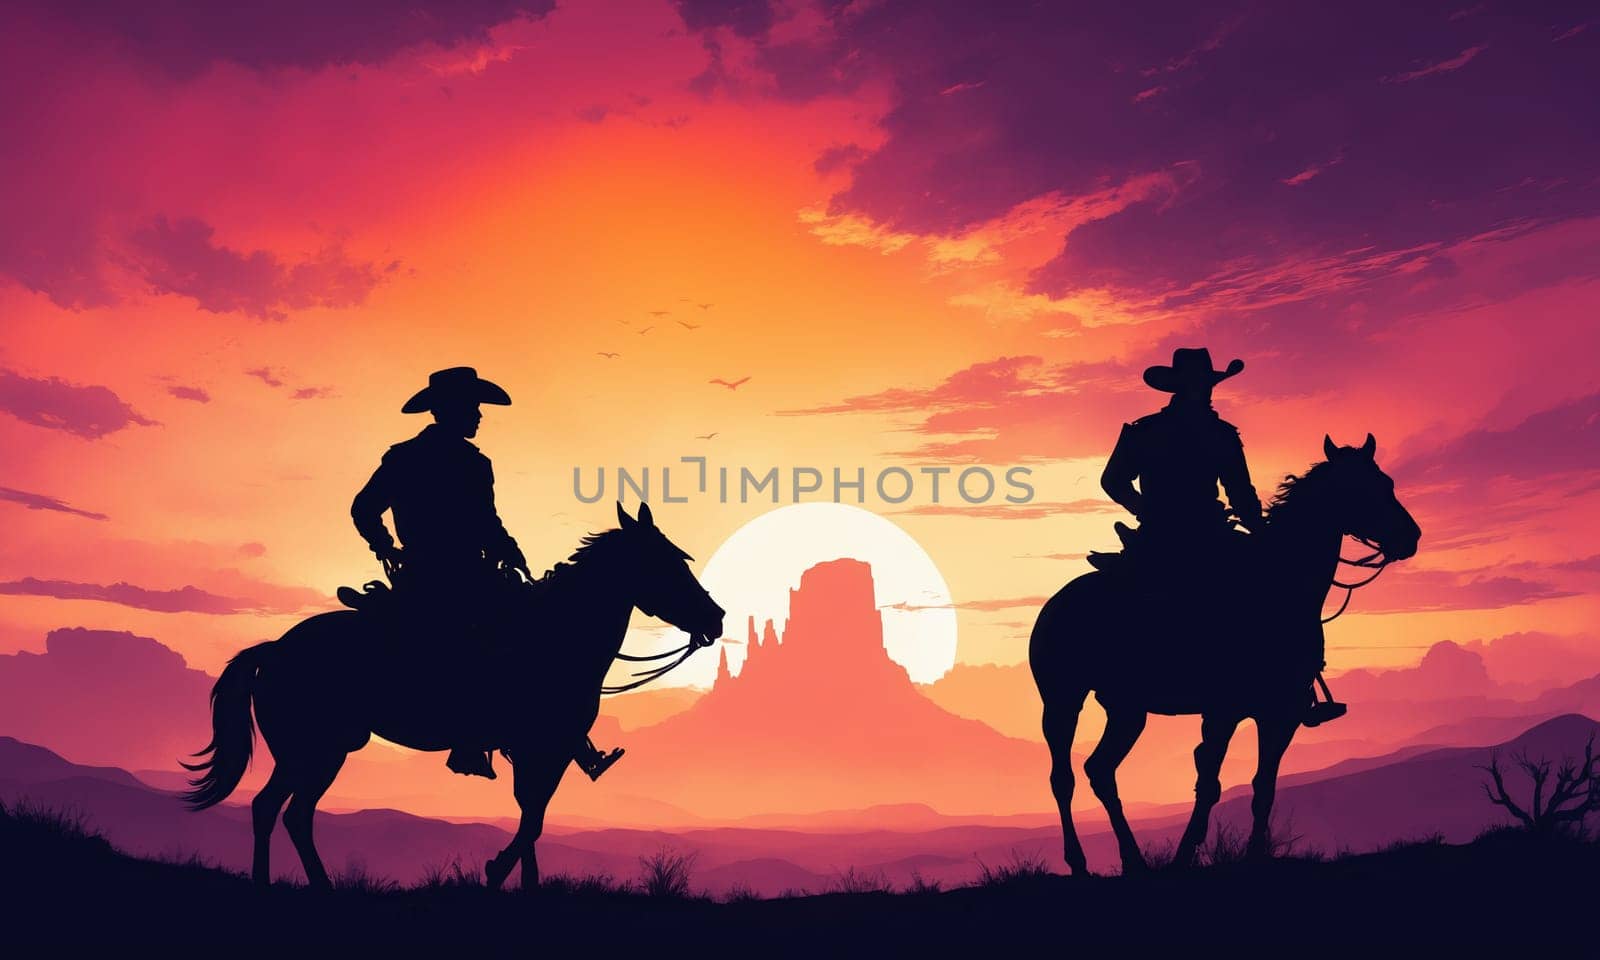 Two cowboys riding working animals through the desert plains at dusk, under a colorful sky filled with clouds. Enjoying outdoor recreation in the stunning landscape